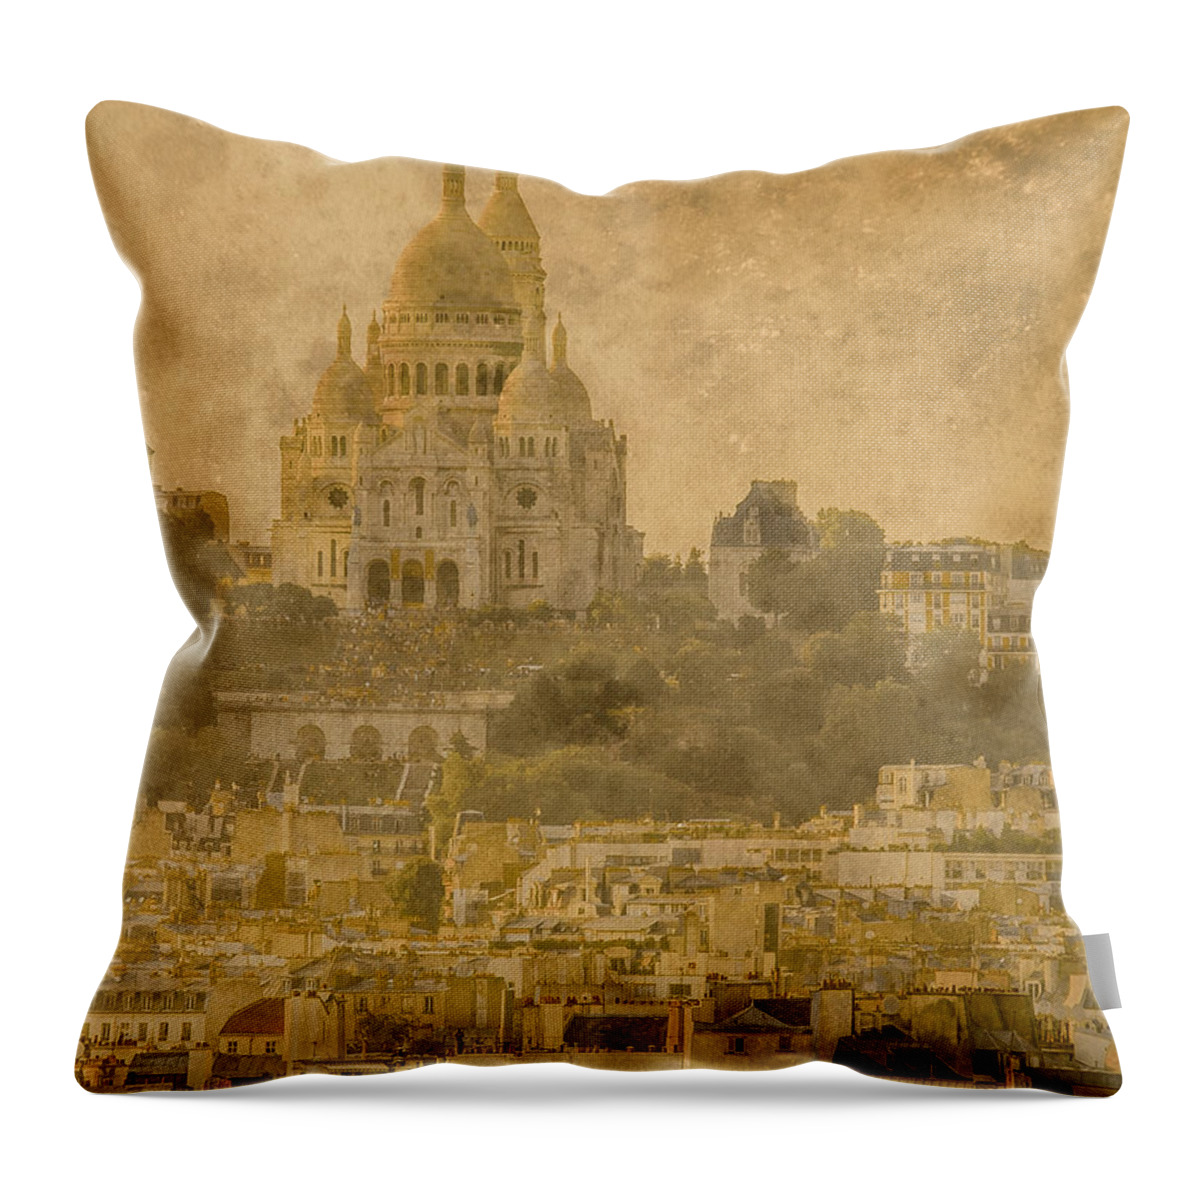 France Throw Pillow featuring the photograph Paris, France - Sacre-Coeur Oldplate by Mark Forte